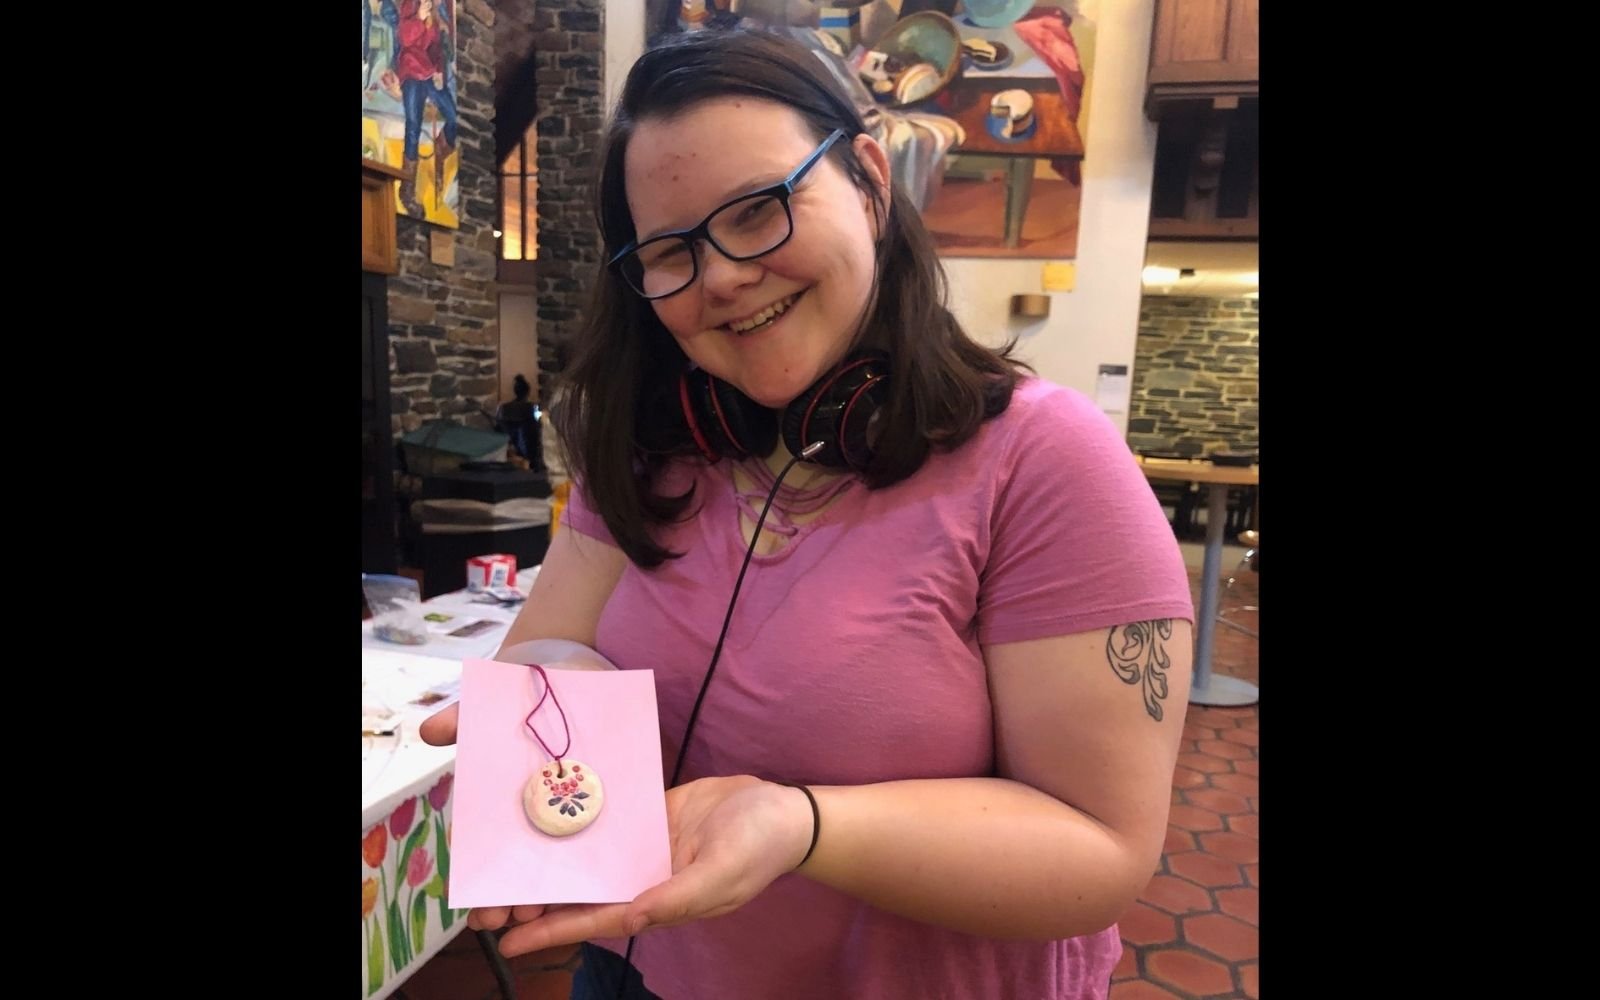 A smiling person with brown hair, glasses, and a pink tee shirt holds up a ceramic necklace to the camera